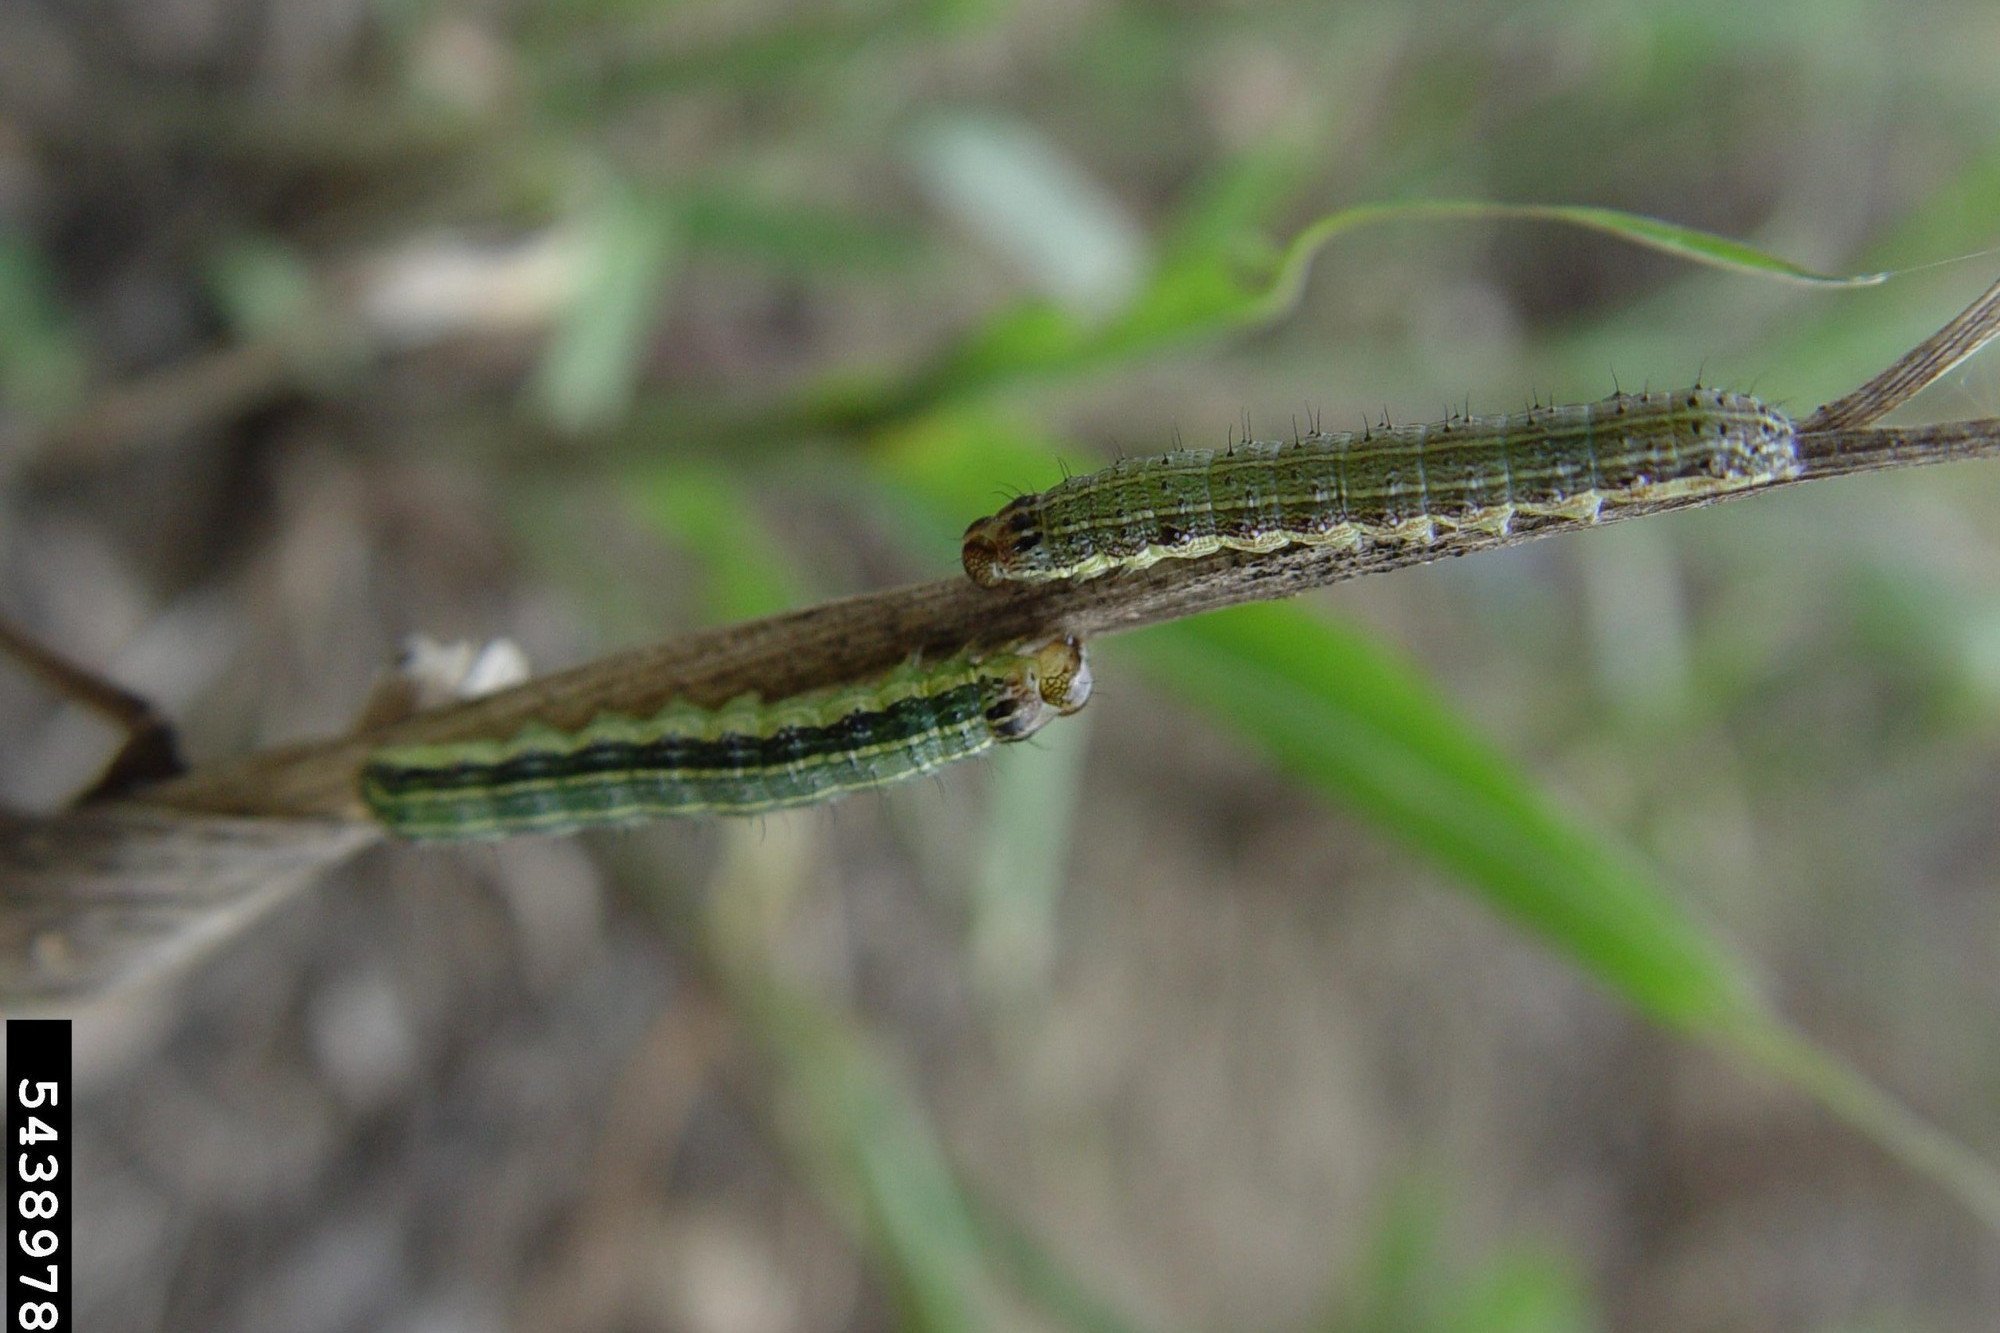 Fall armyworm detected on the Tablelands - feature photo